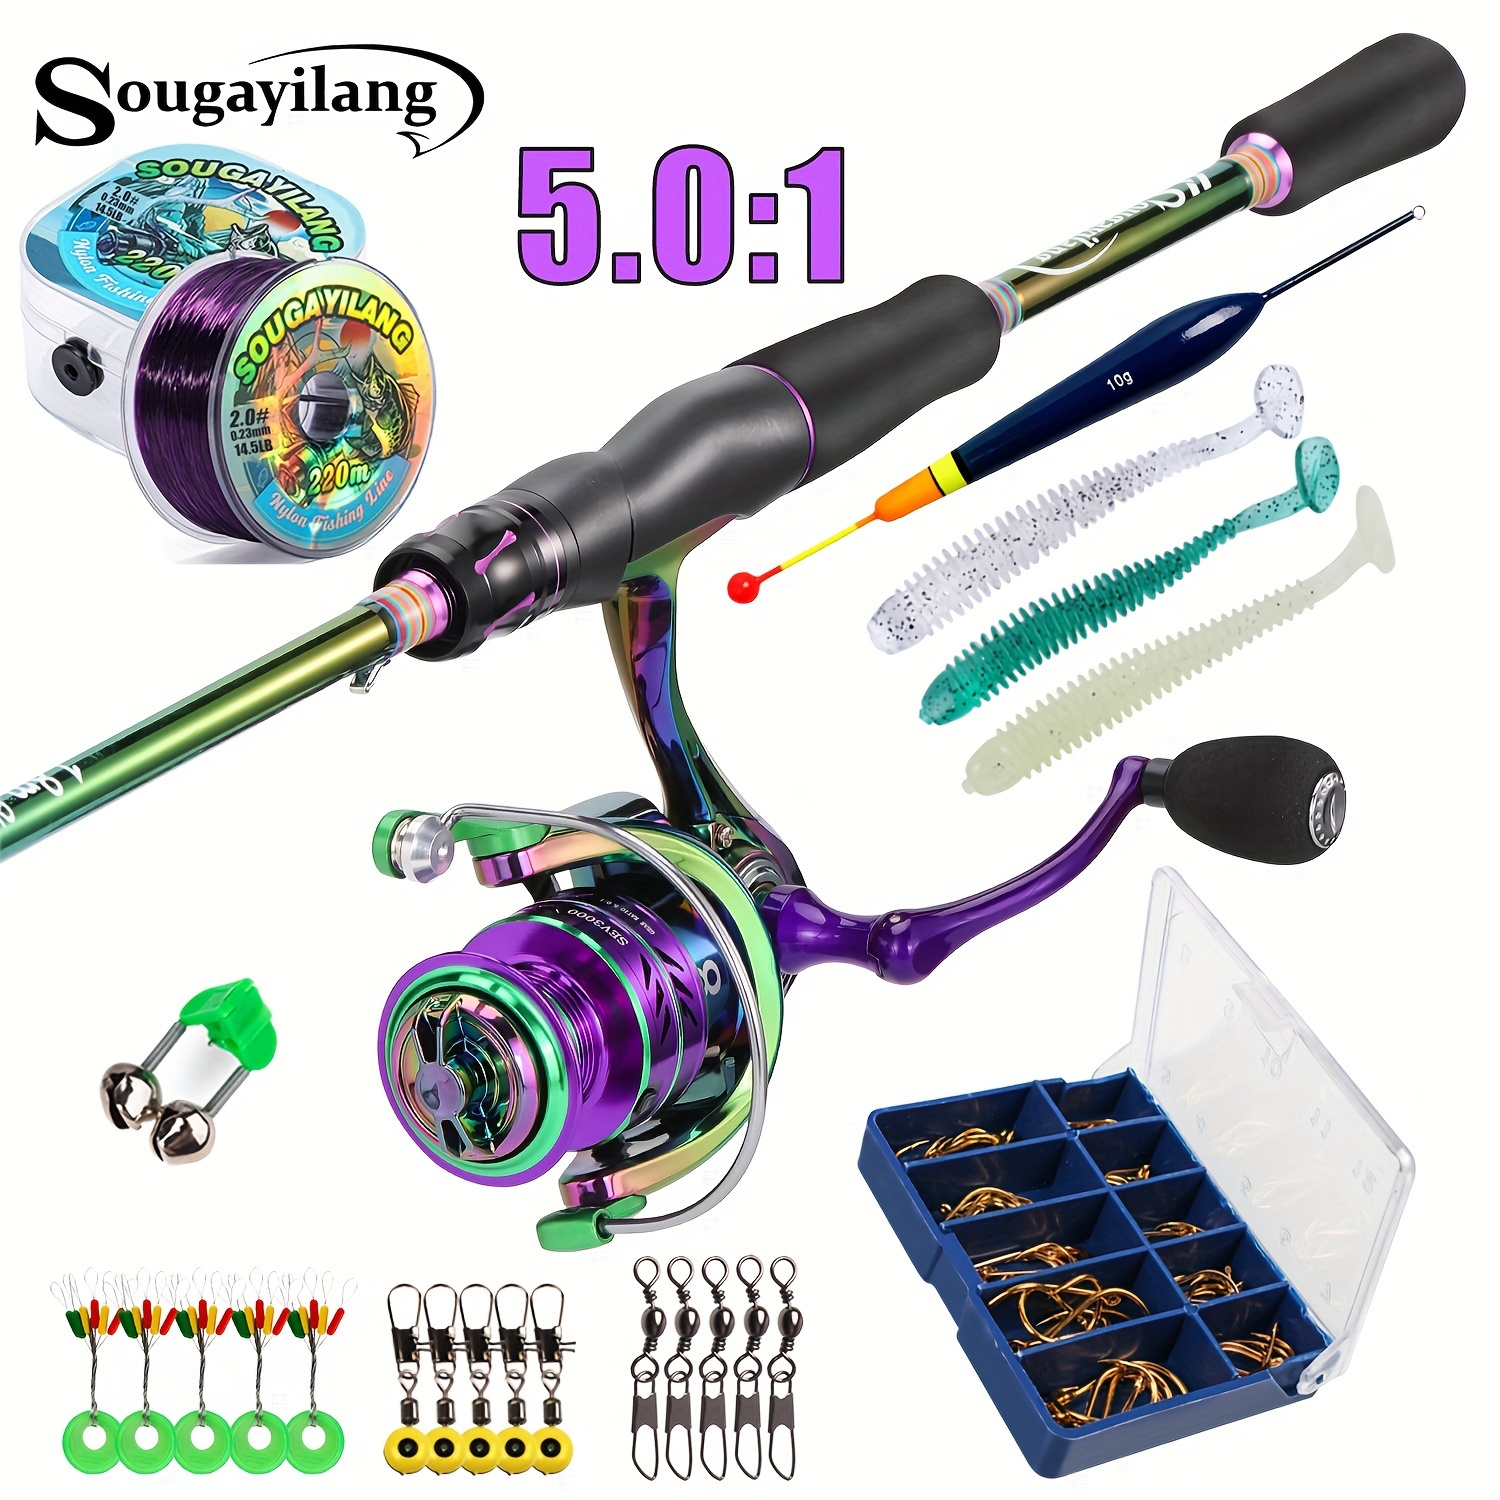 Sougayilang 2 Sections Fishing Rod And Reel Combo, High Sensitive Carbon  Spinning Fishing Rod, 5.0:1 Gear Ratio Aluminum Spool Fishing Reel, For  Fresh